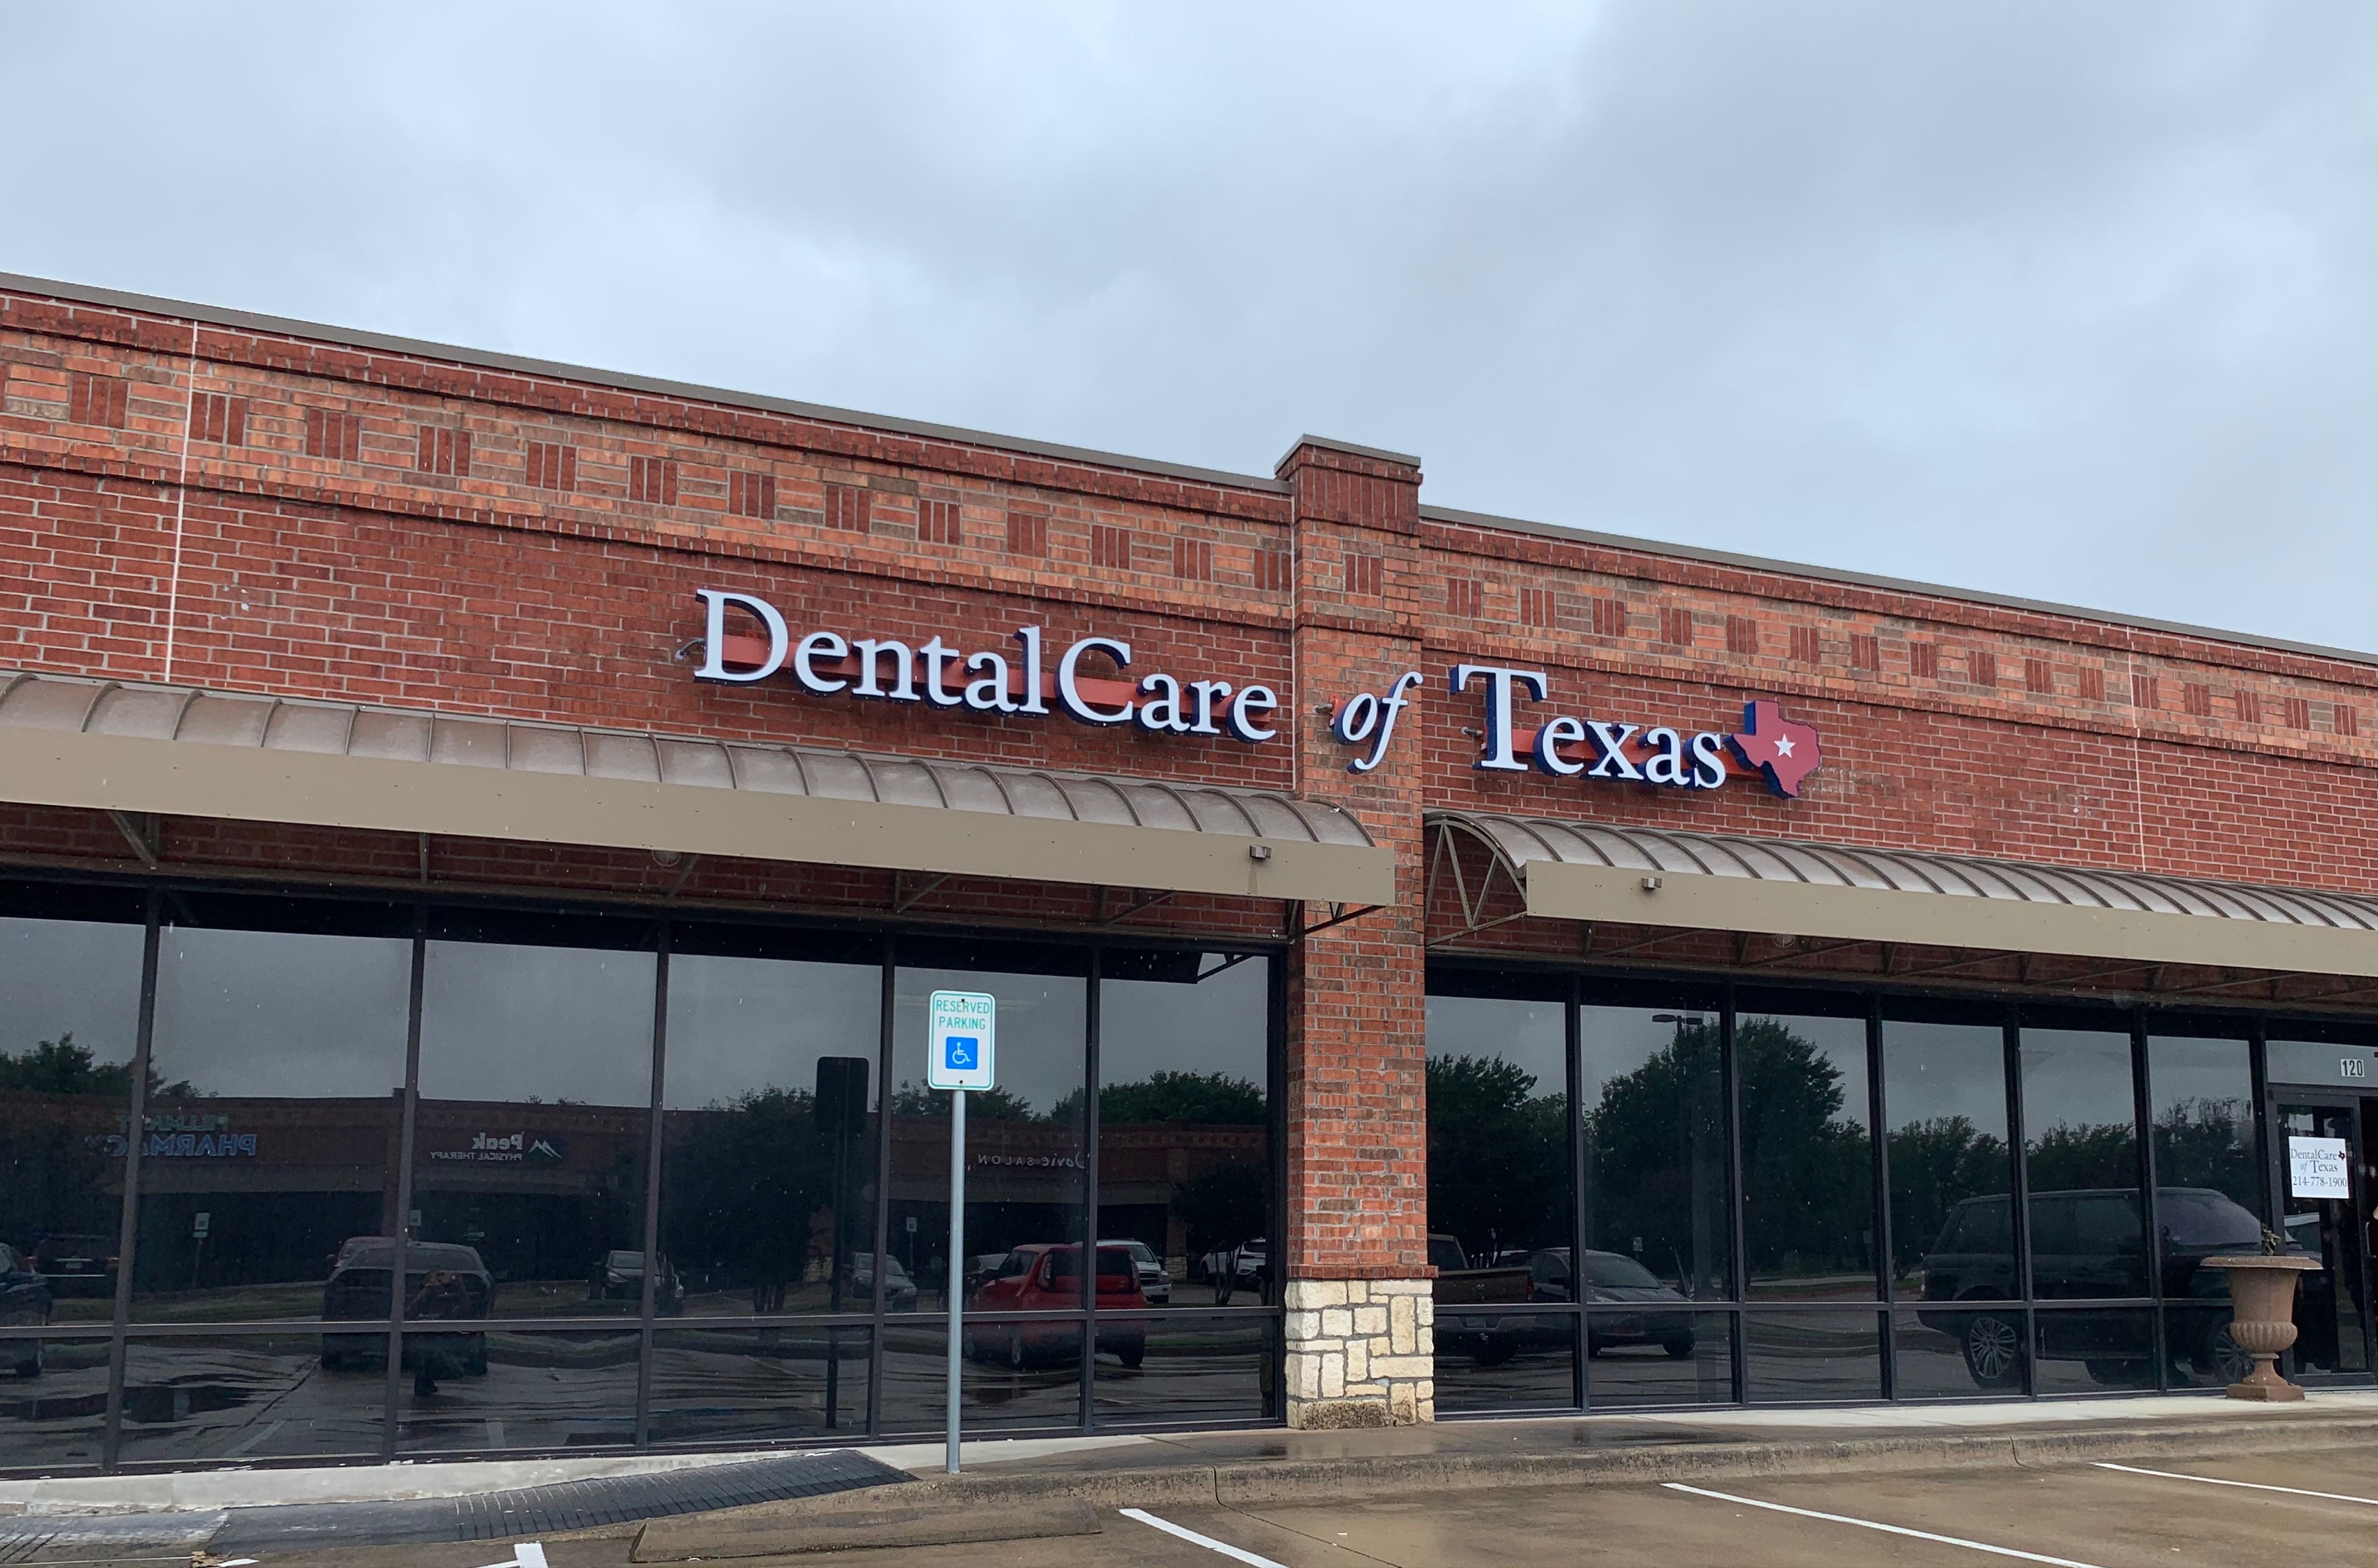 Dental Care of Texas storefront